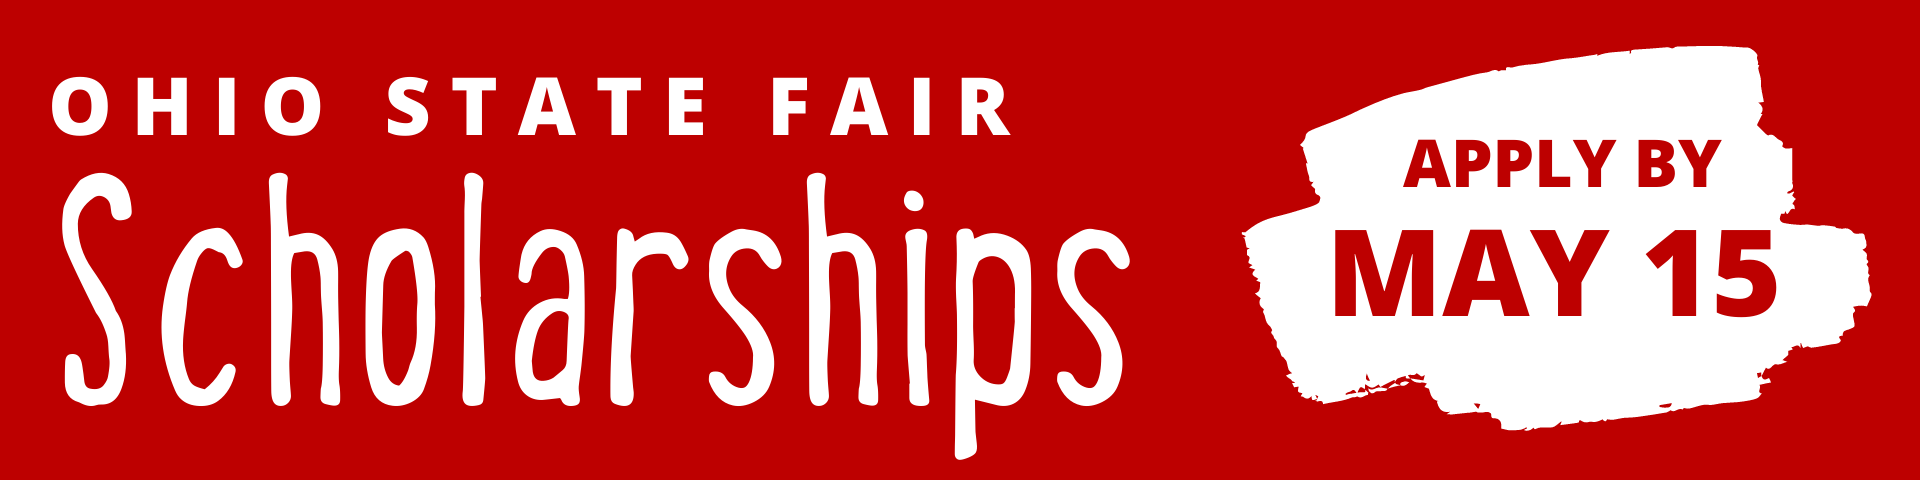 Apply for Ohio State Fair scholarships by May 15.